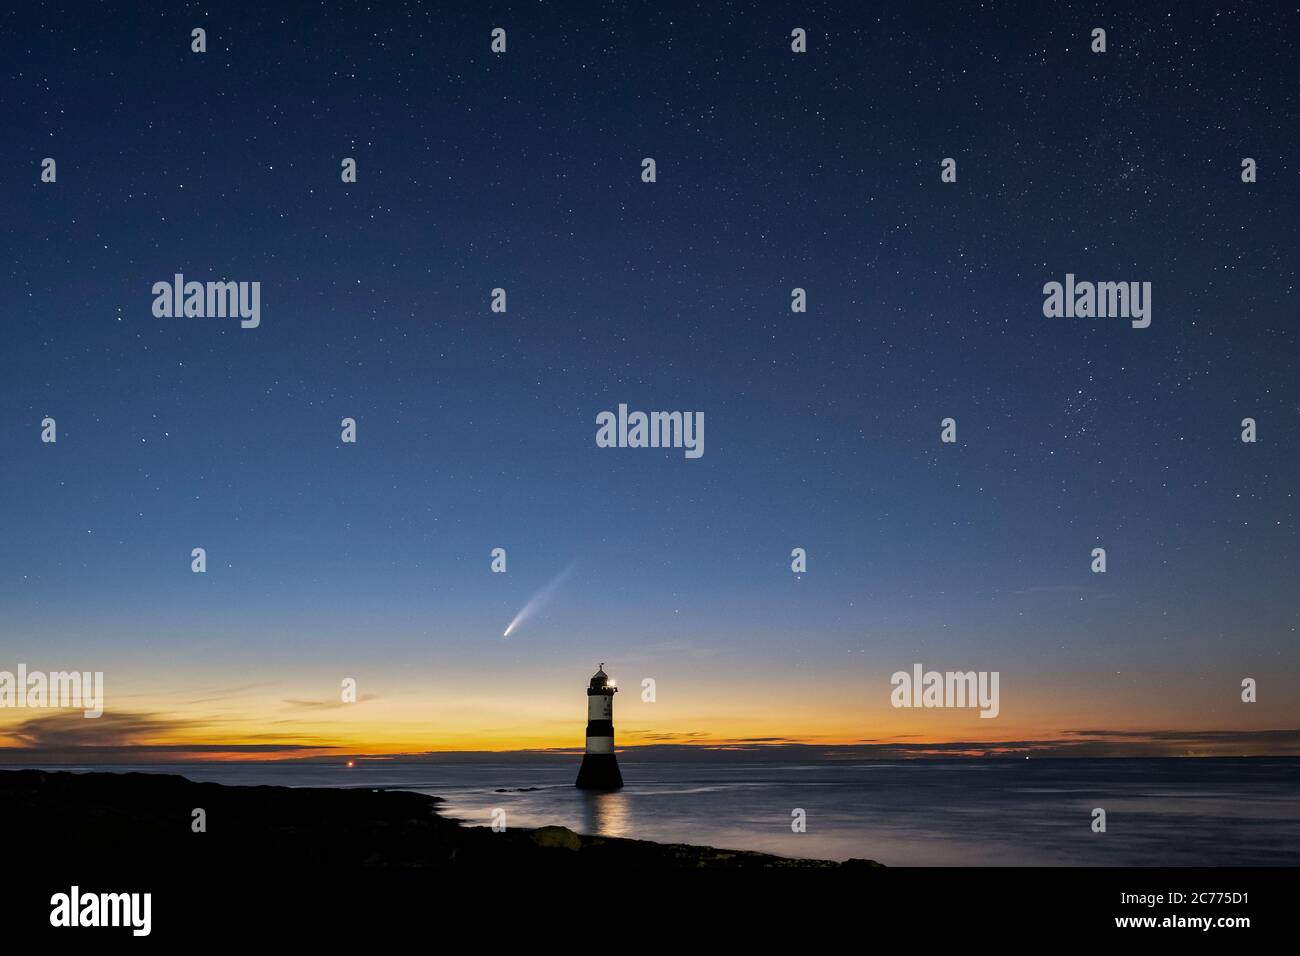 Comet NEOWISE and The Night Sky above Trwyn Du Lighthouse or Penmon Point Lighthouse, Penmon, Anglesey, North Wales, UK Stock Photo